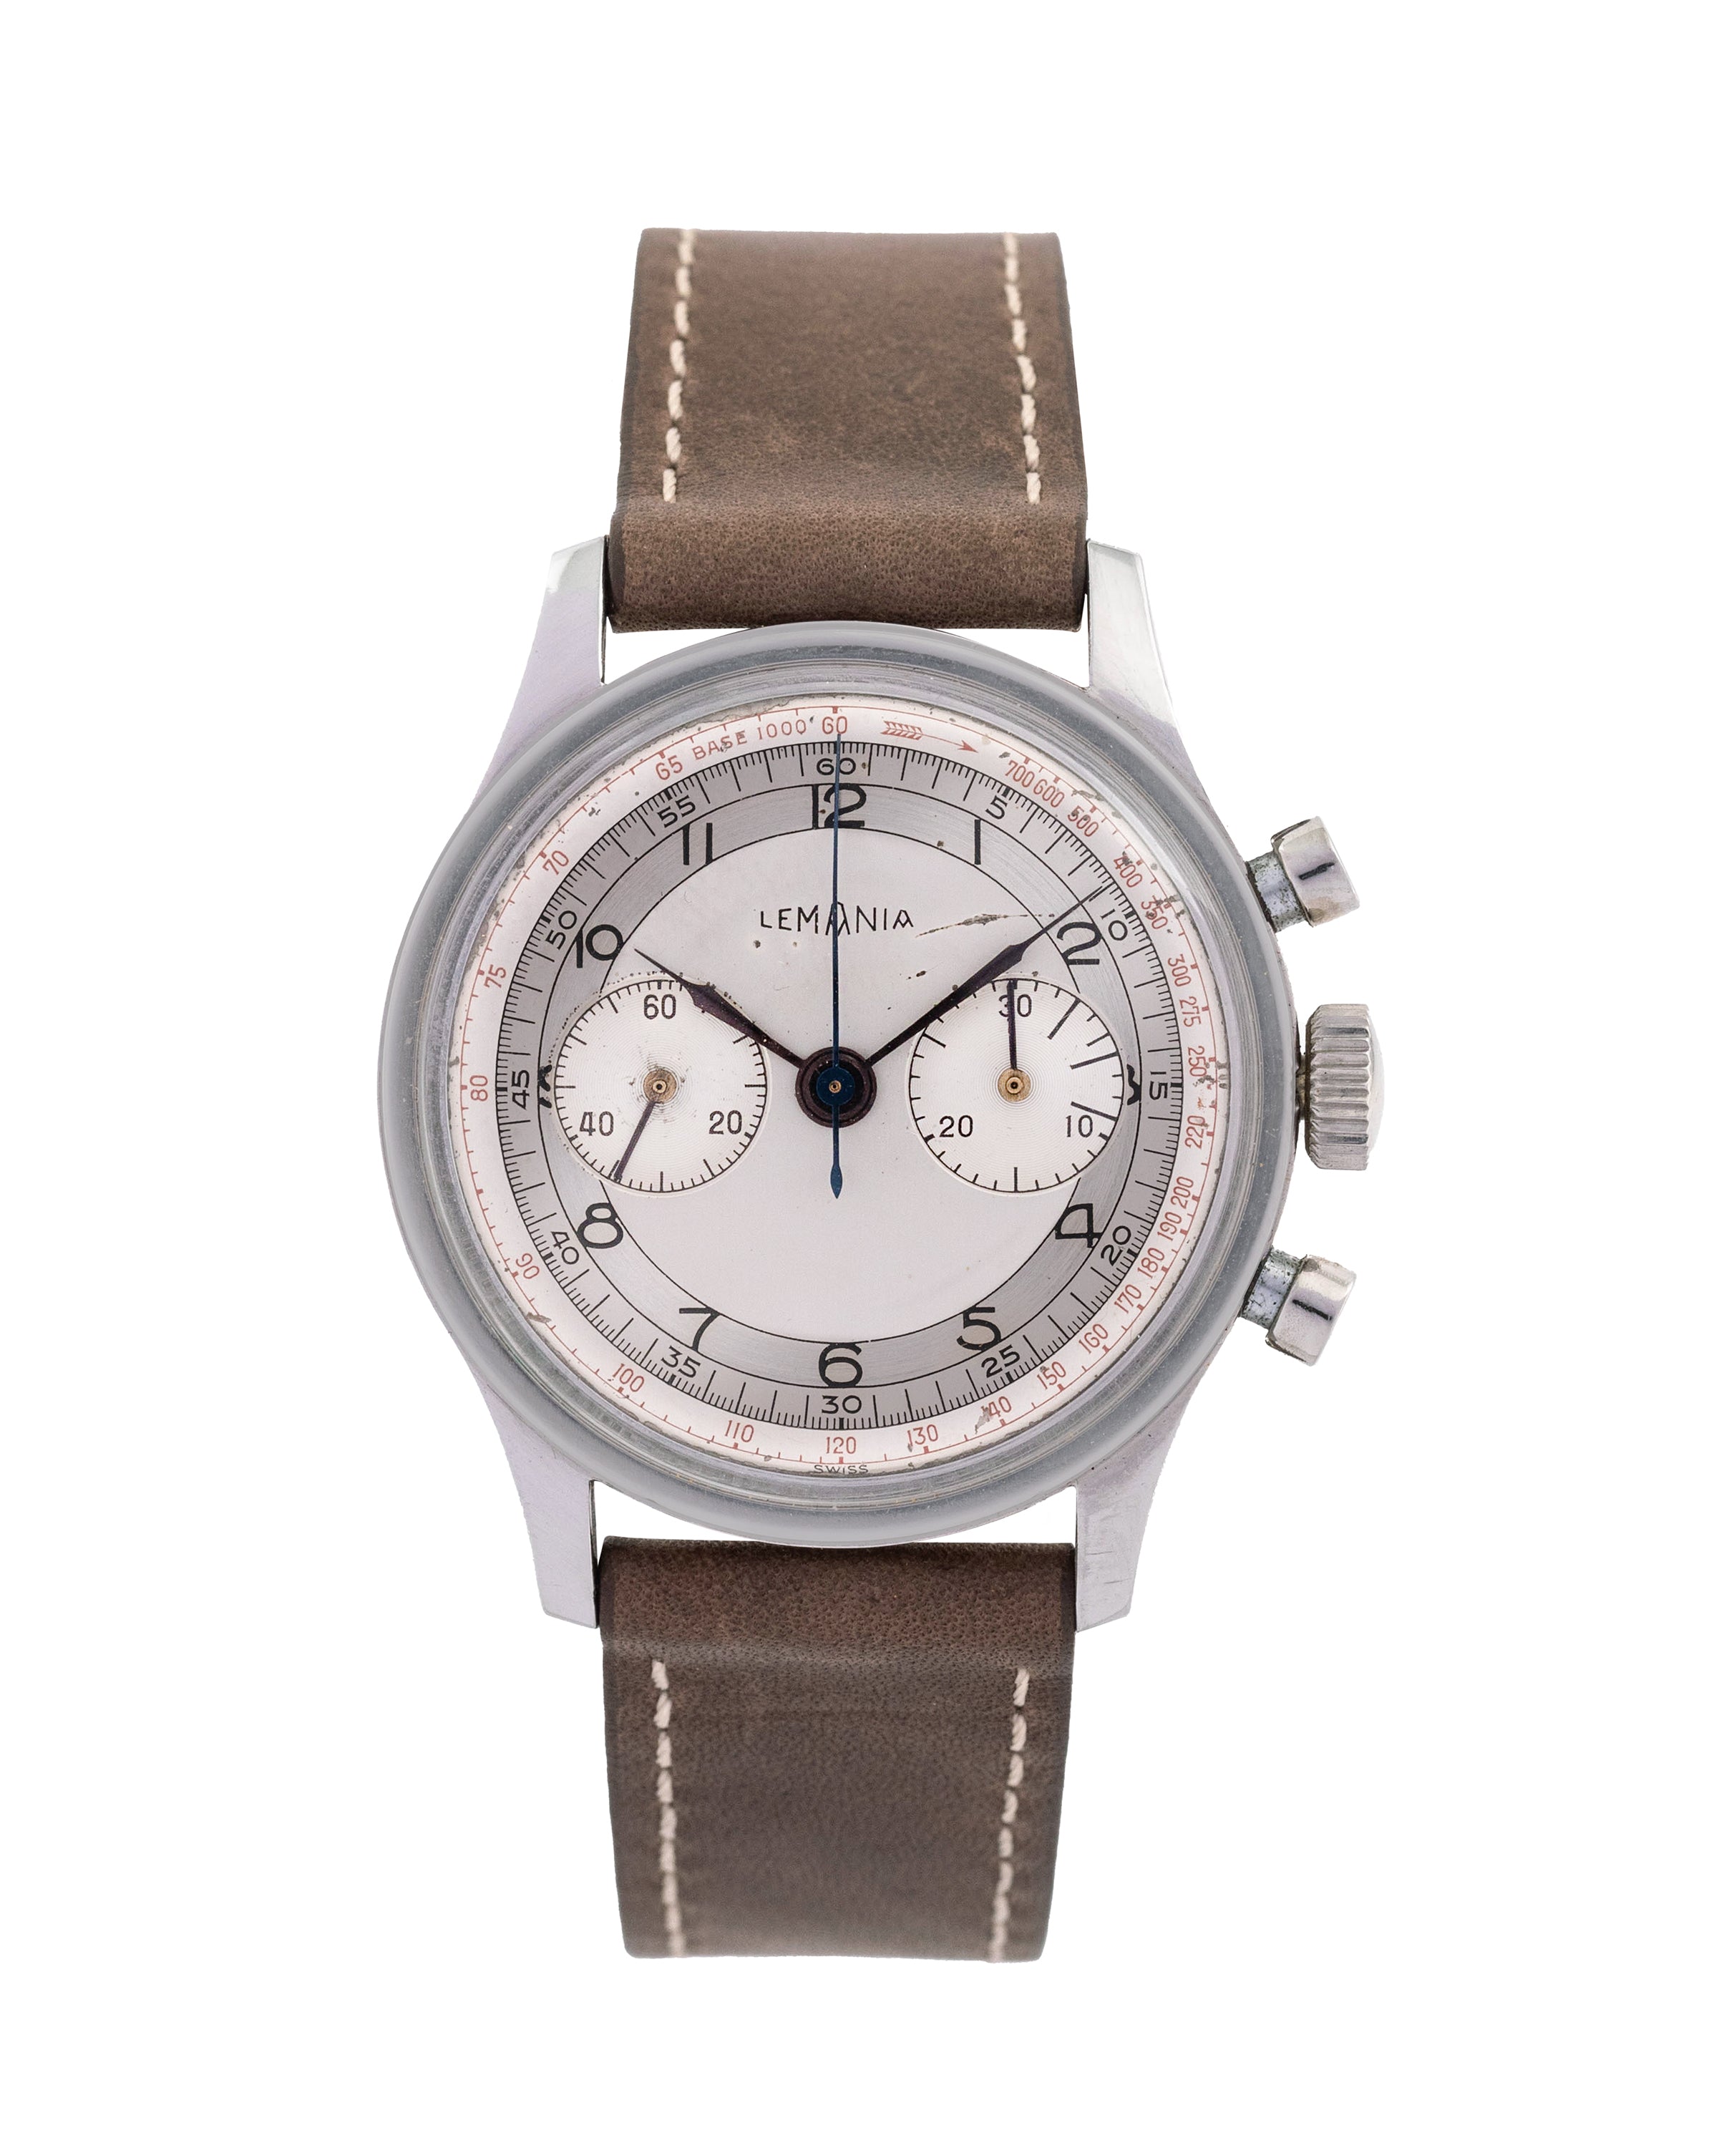 Lemania Ref. 6007 Chronograph with two-tone argentè dial wrist watch 